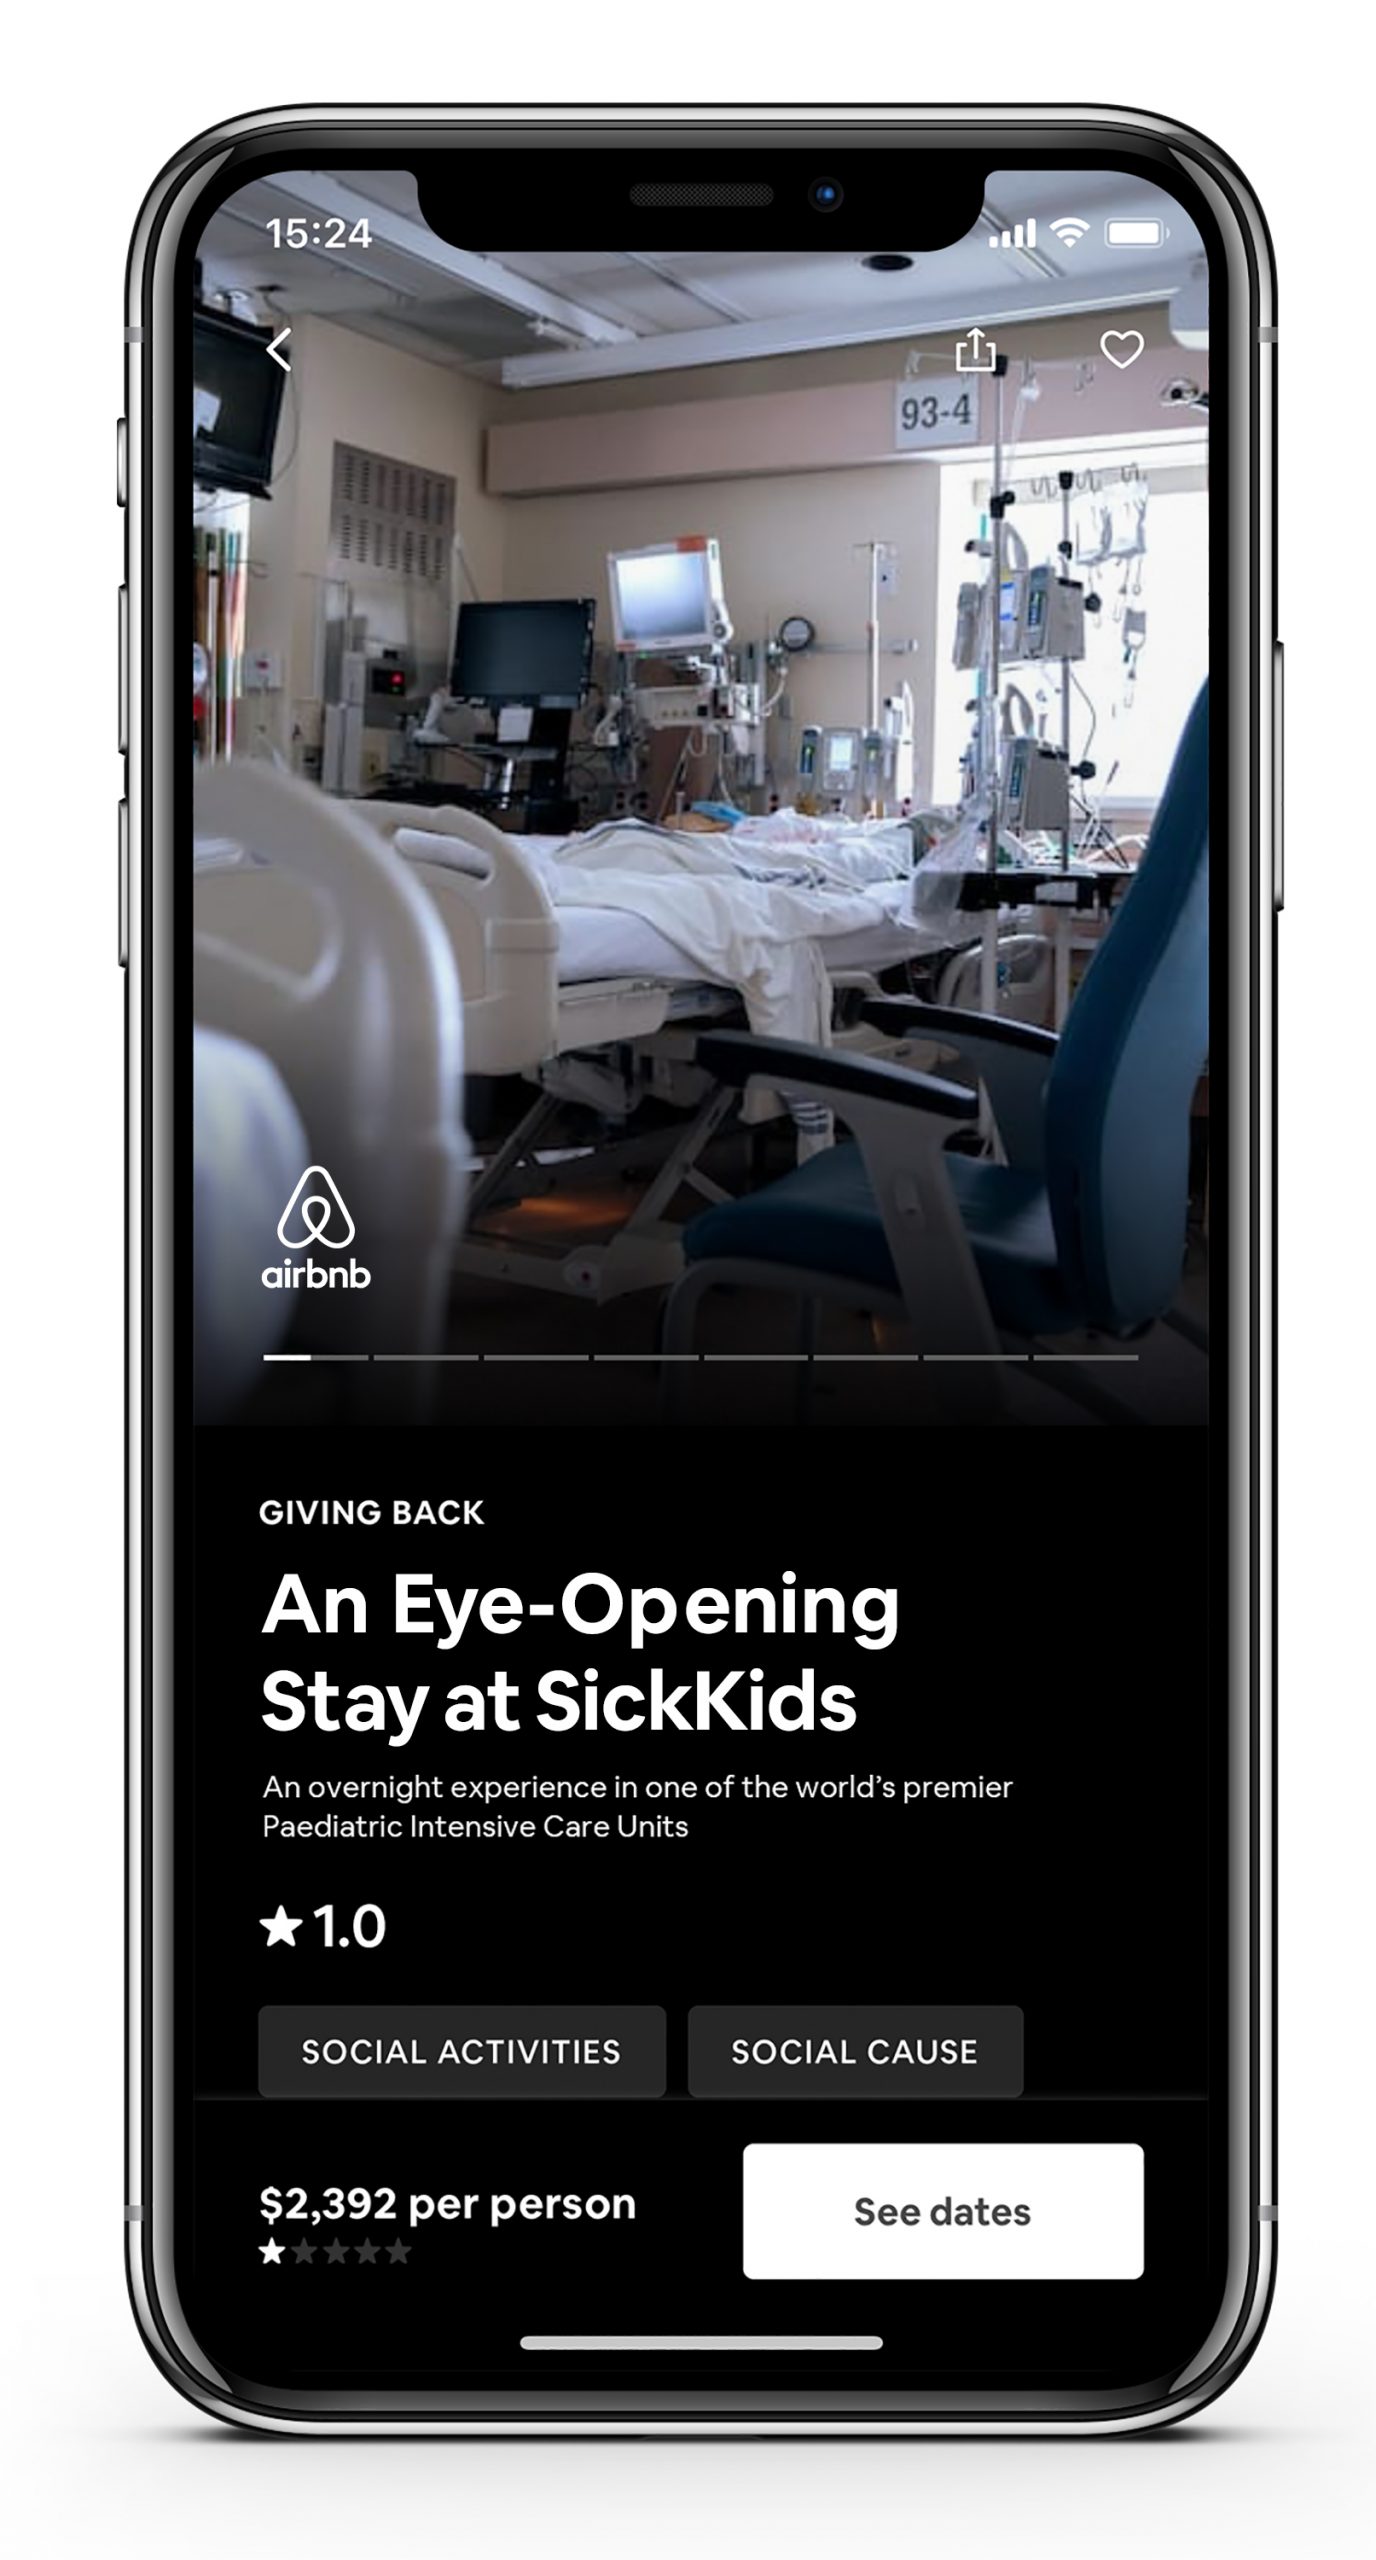 SickKids Airbnb - Logo - https://s41078.pcdn.co/wp-content/uploads/2020/08/Advocacy-or-Awarness_SickKids-scaled.jpg